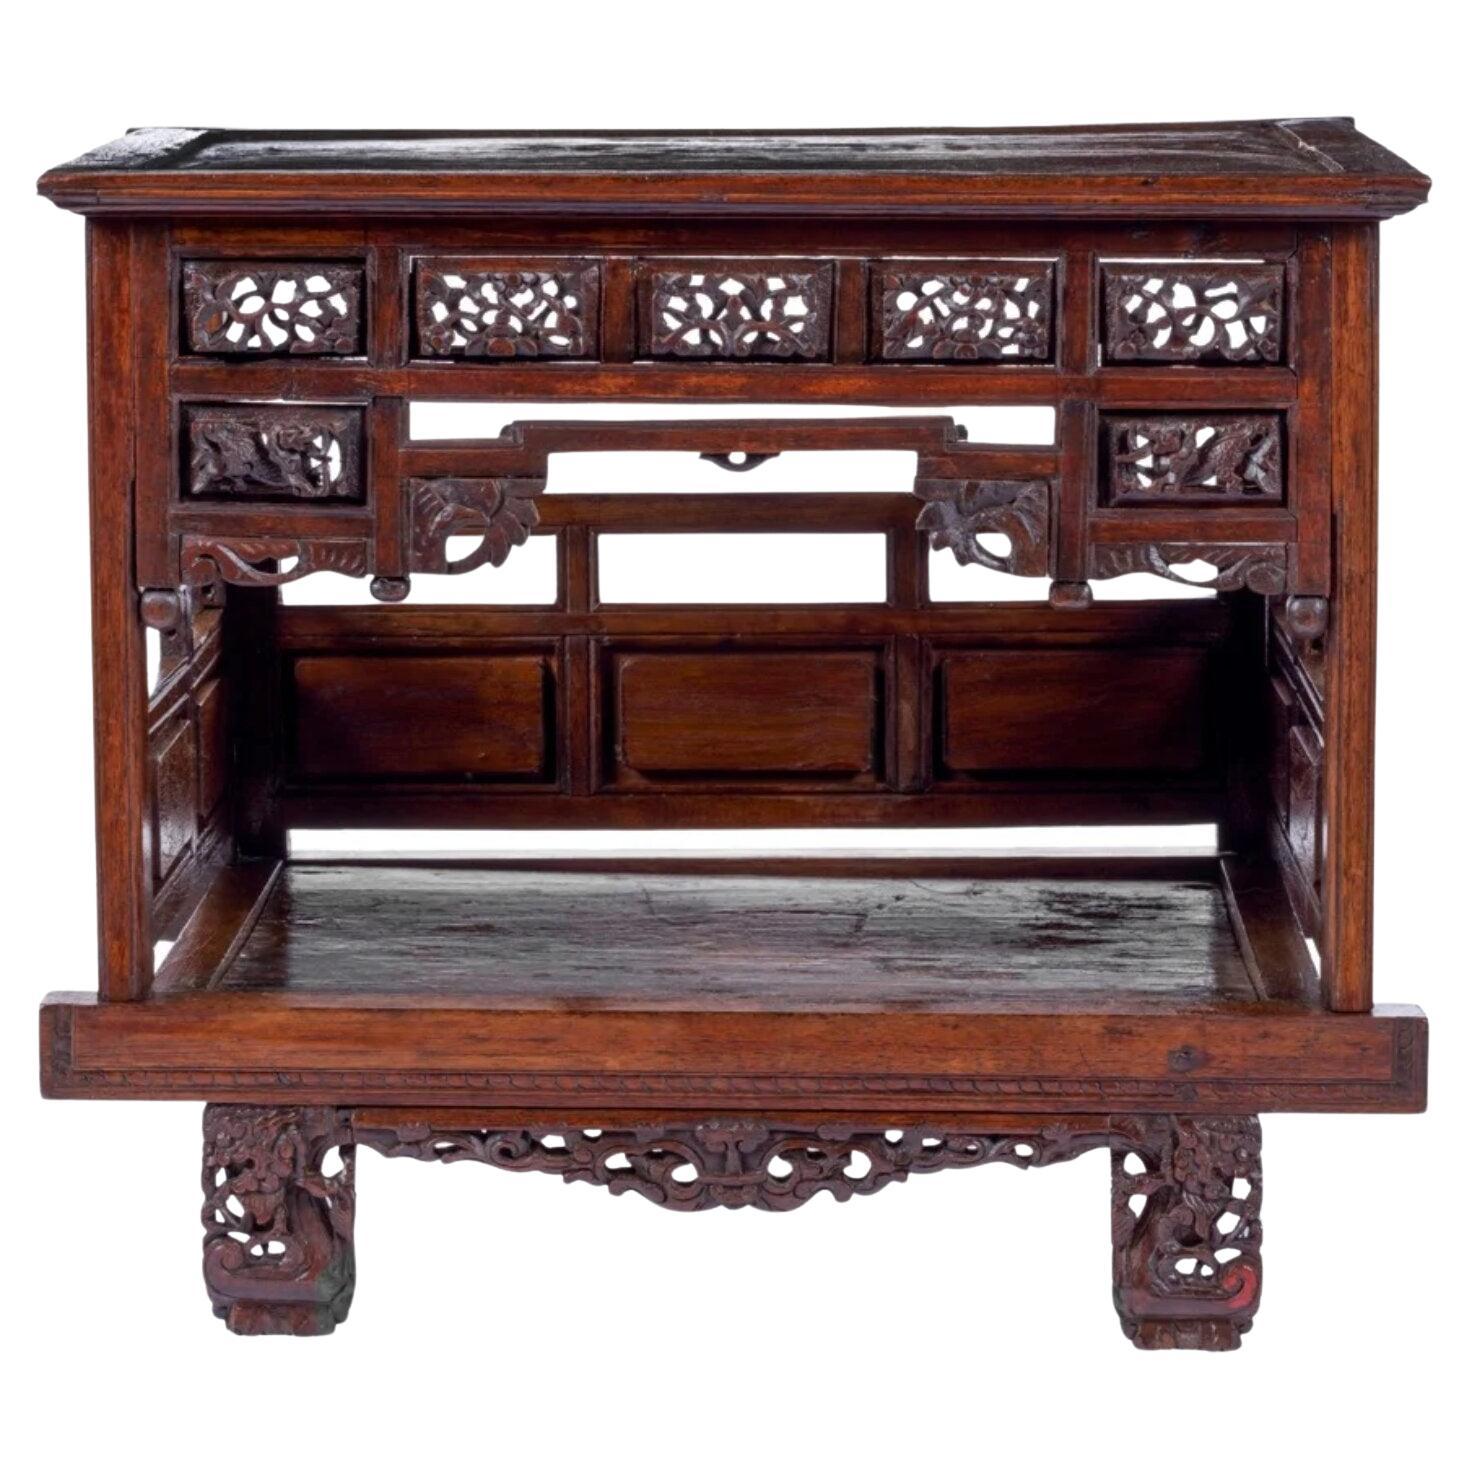 Peranakan Djati Wood Miniature Bed for an Anak Ambar, a Miscarried Fetus For Sale